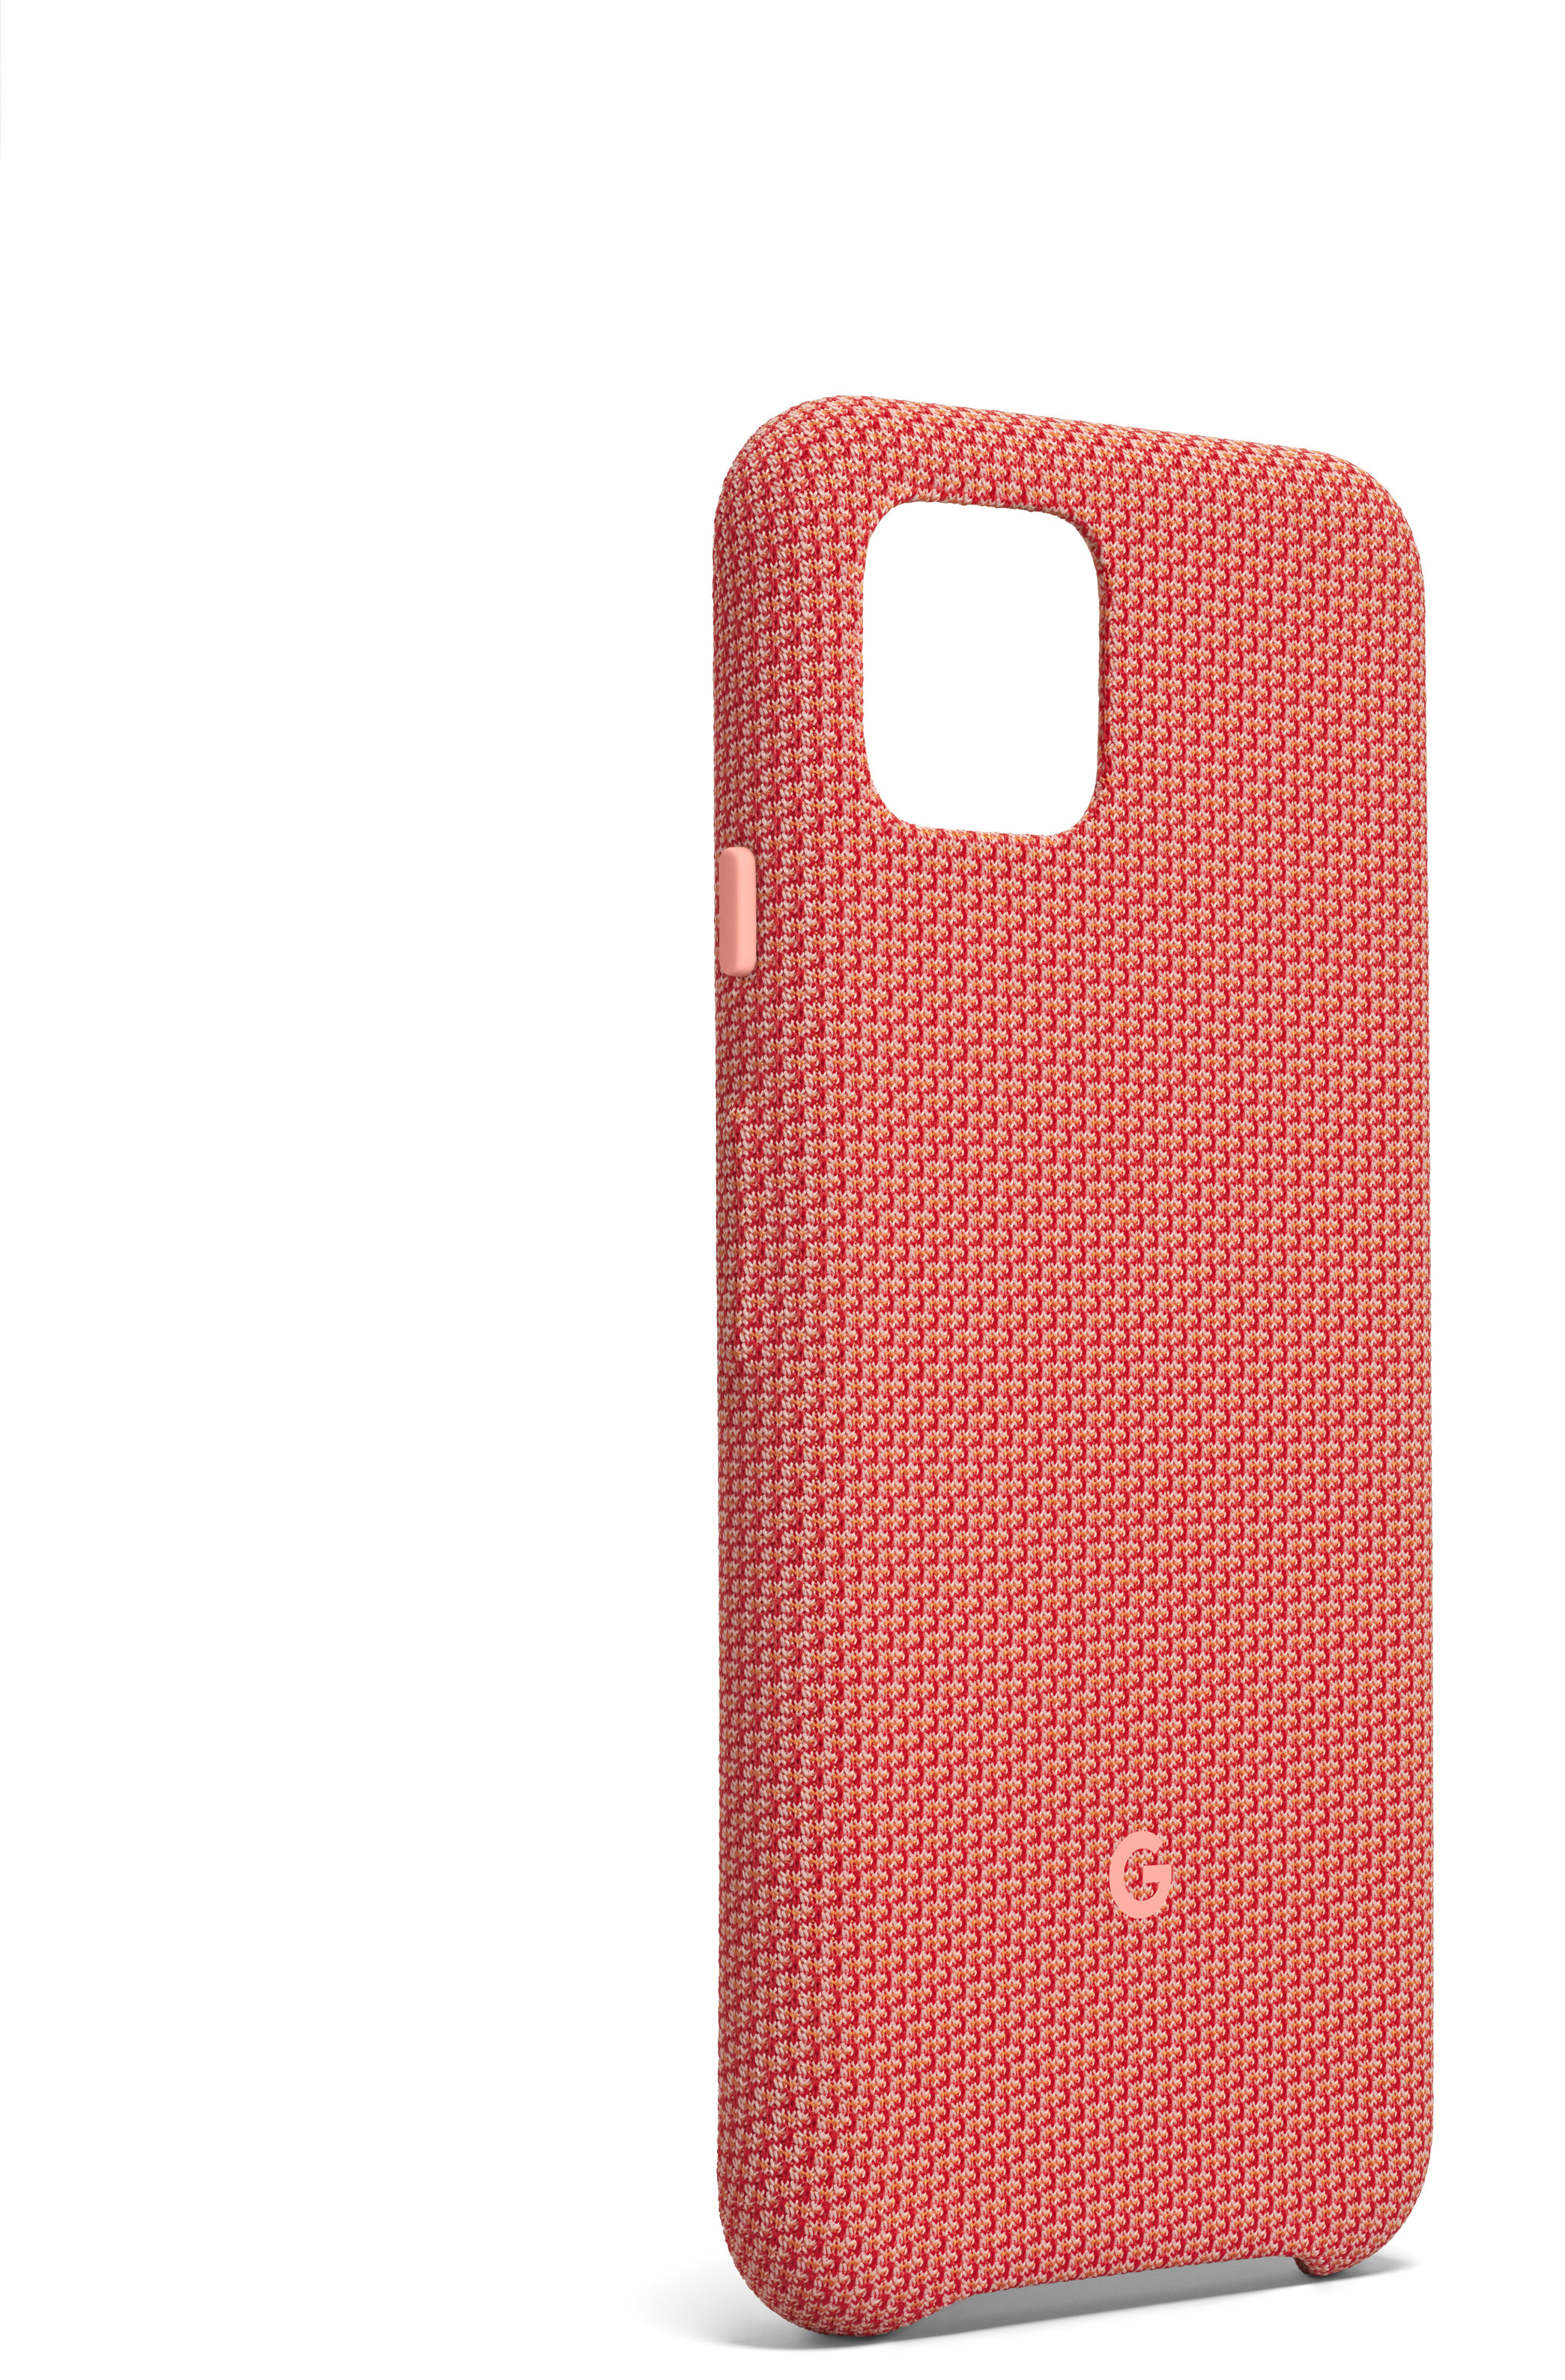 GOOGLE GA01282, Backcover, Google, Pixel Could Coral be 4